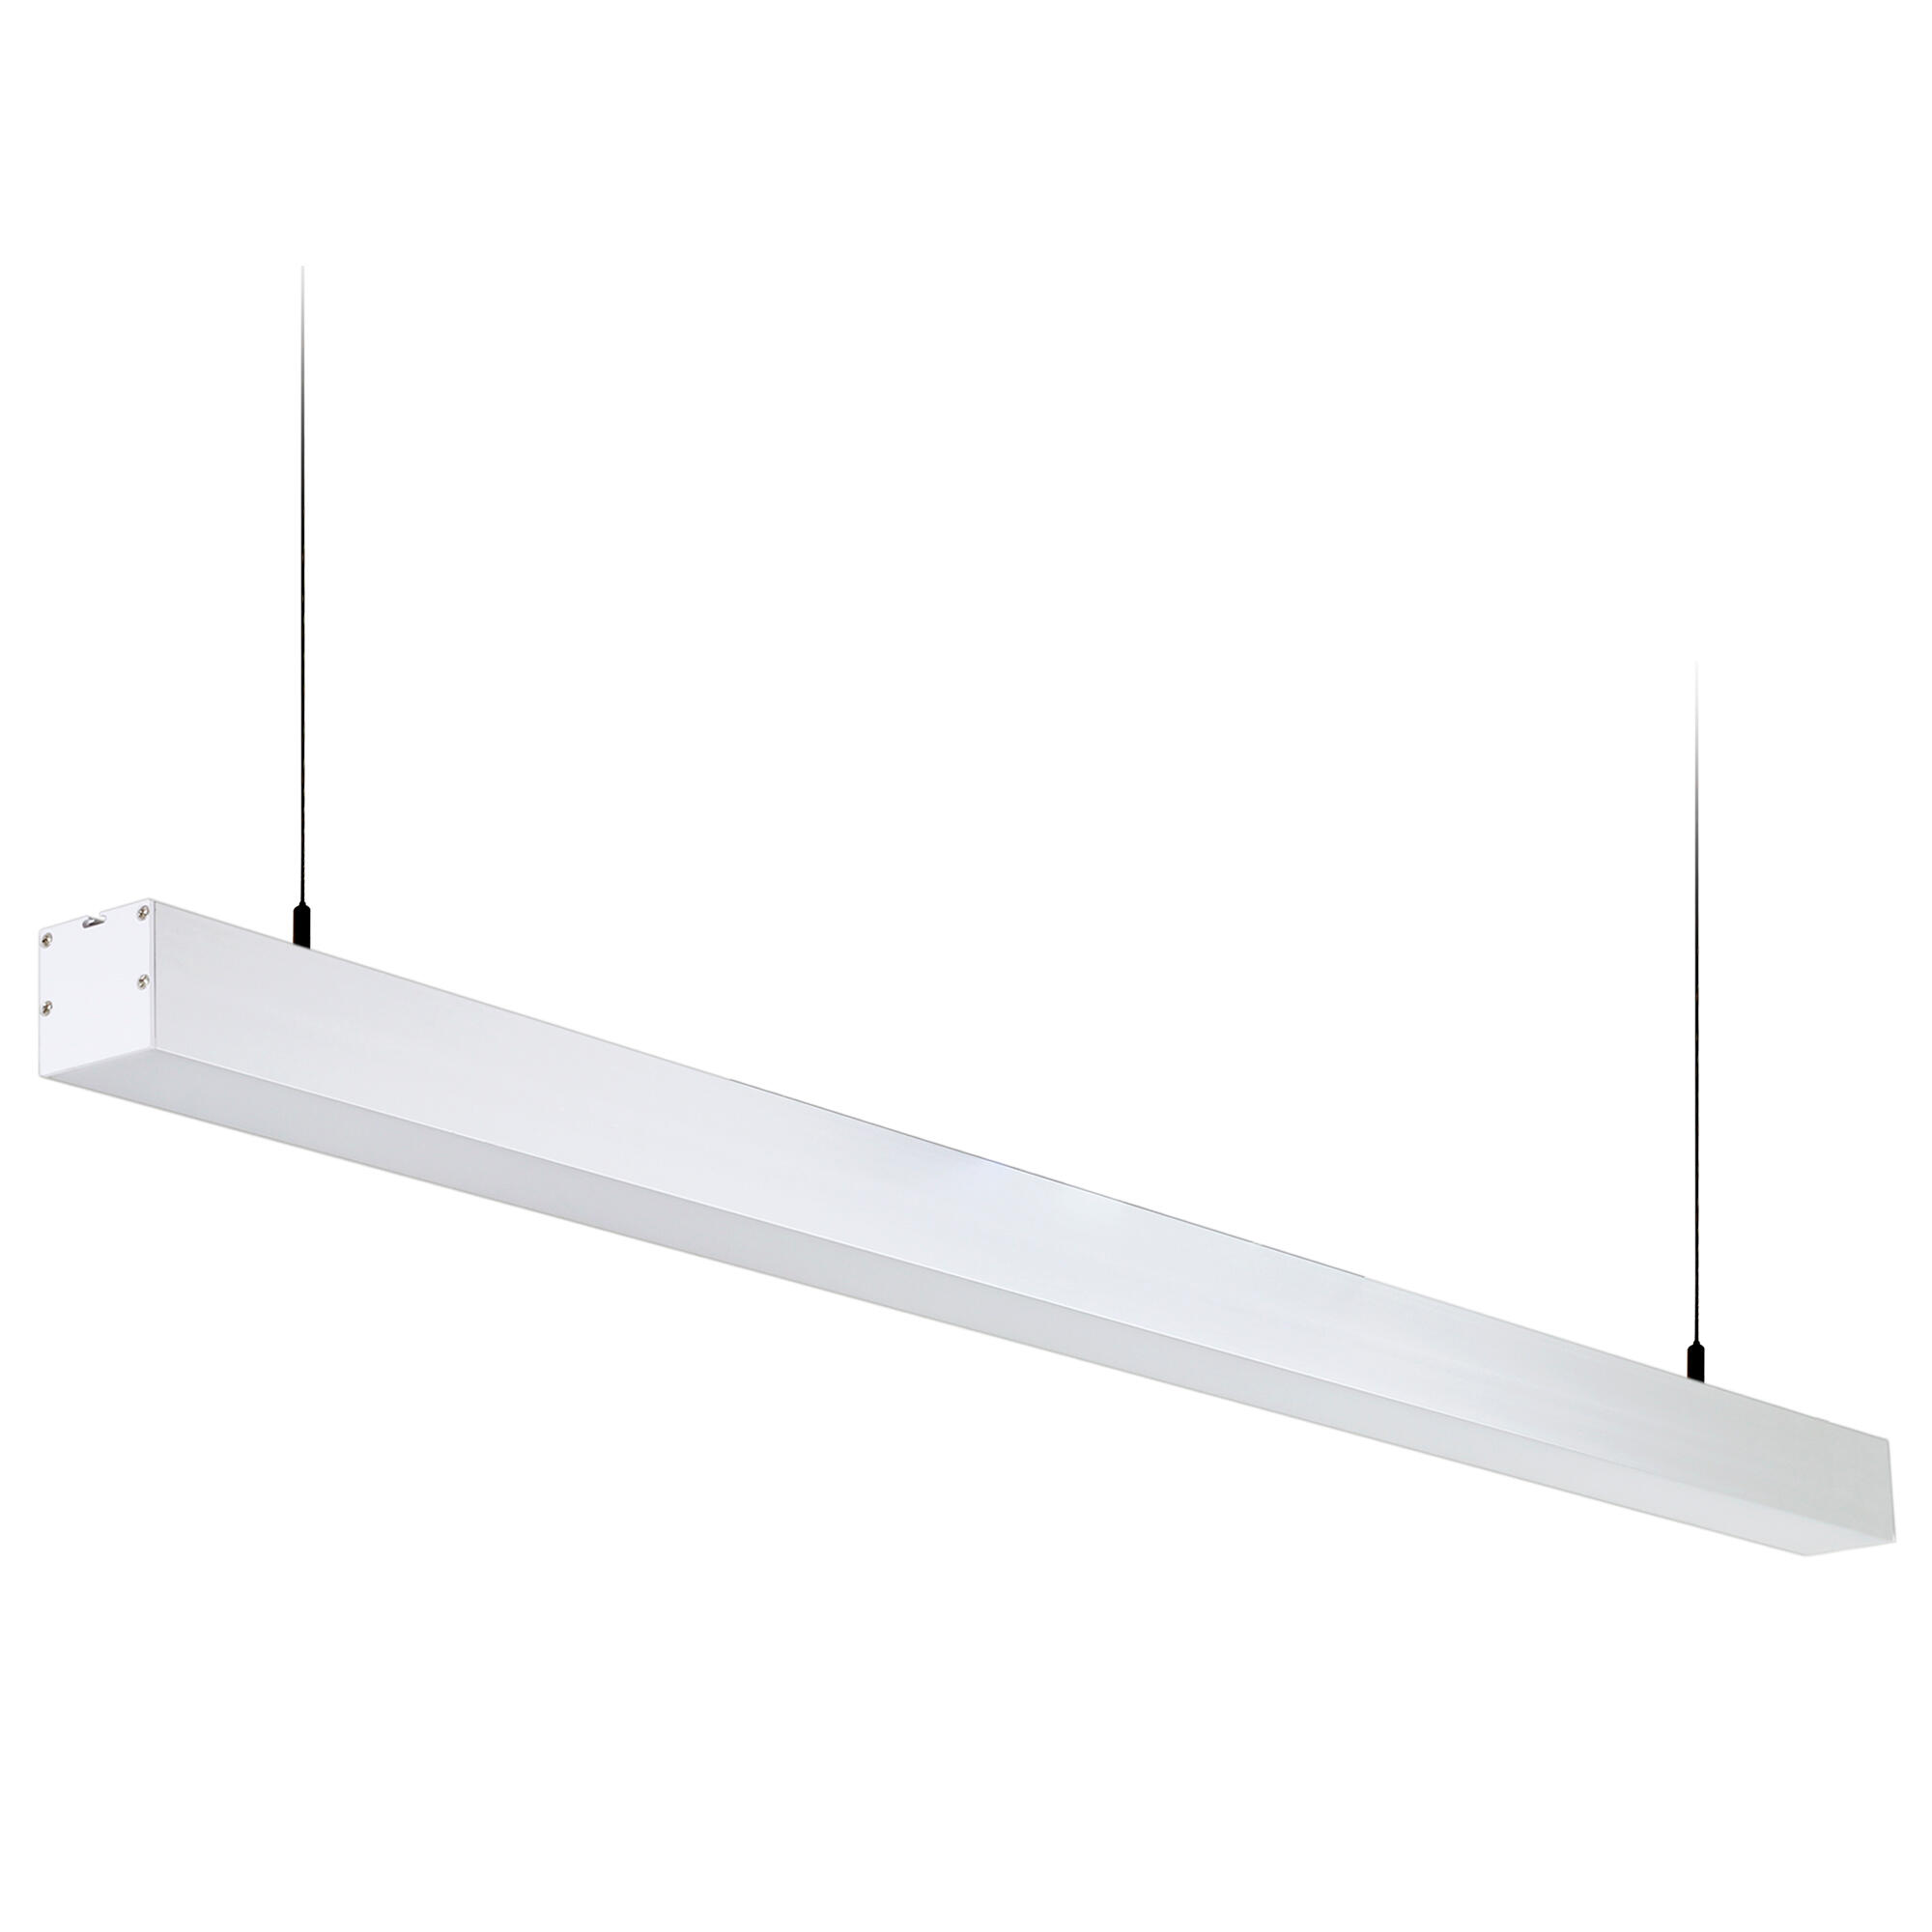 Luminaria led lineal 4620lm 6000k gris